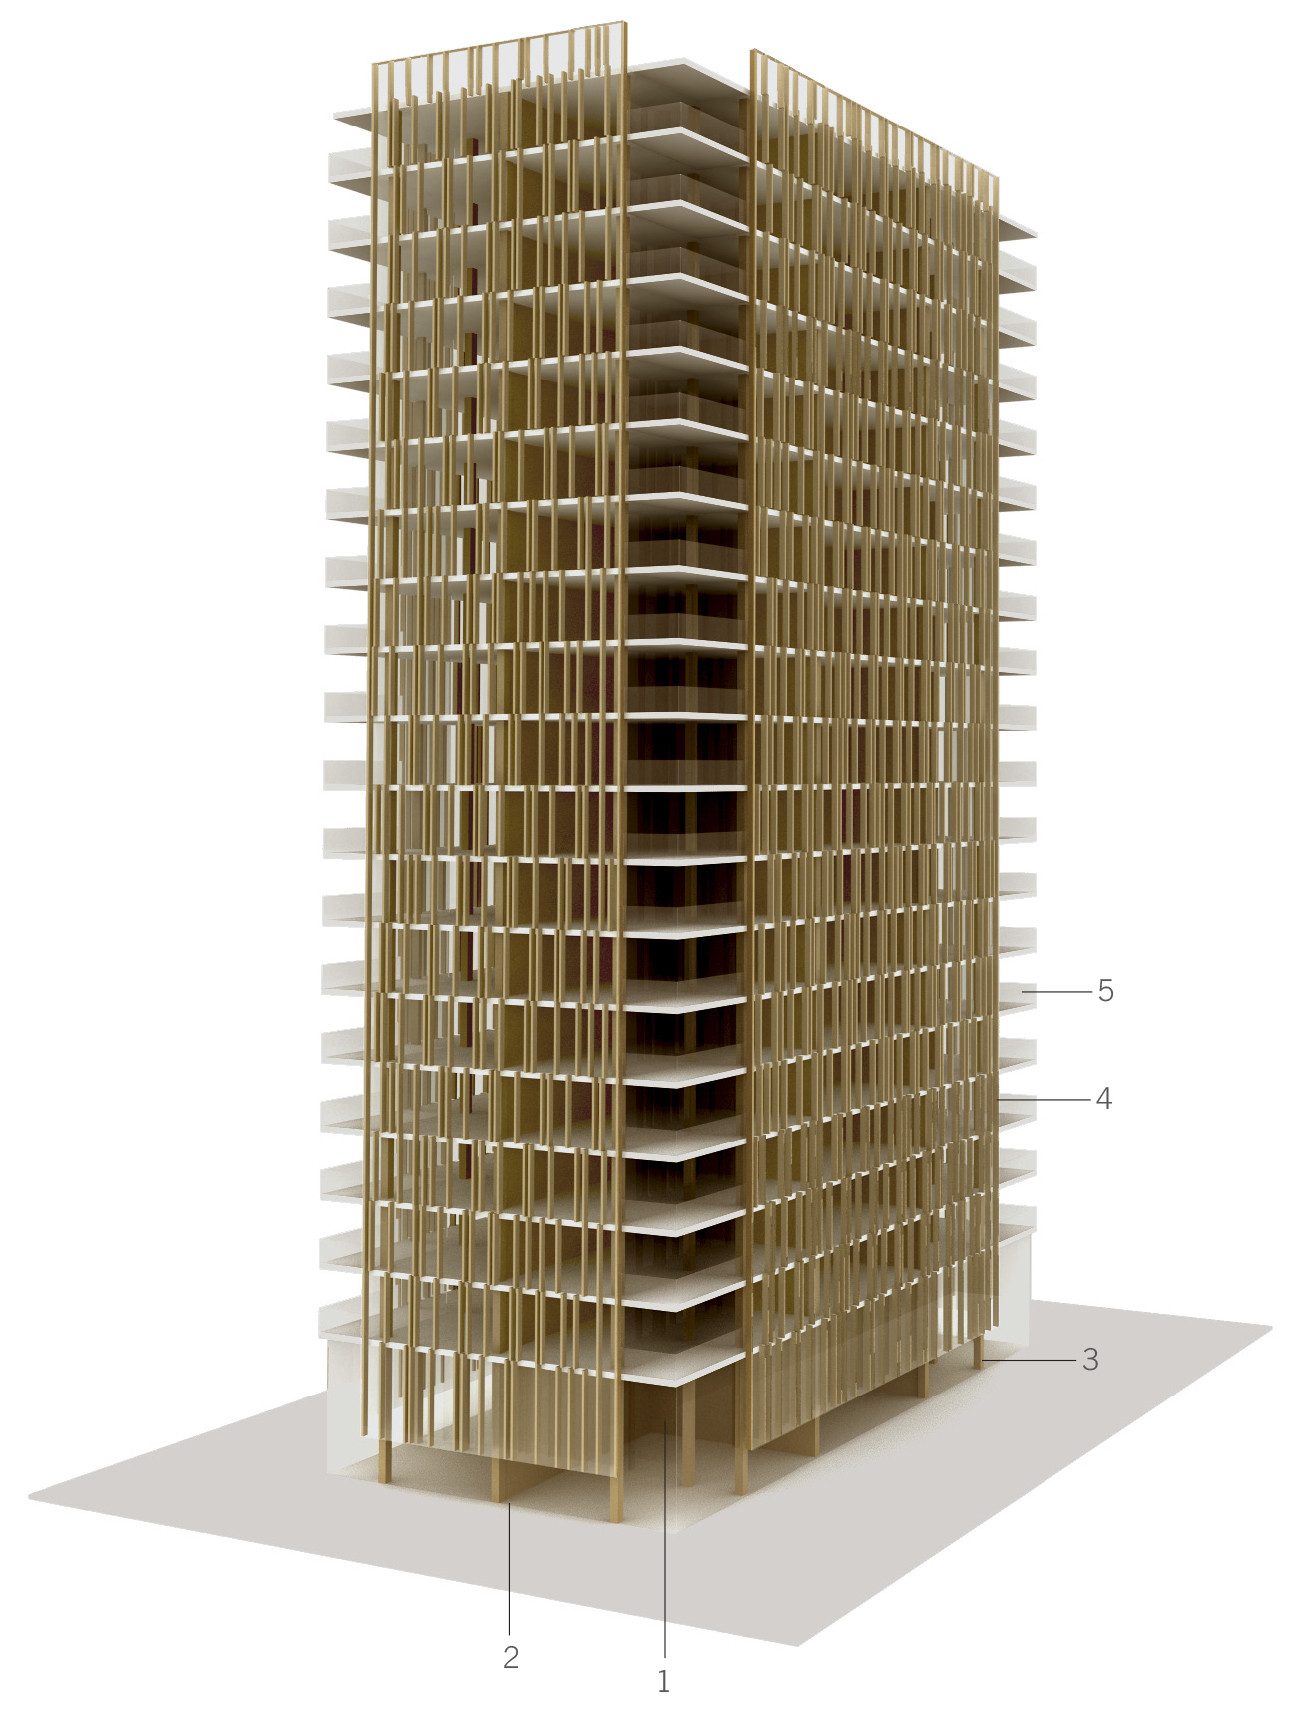 Gallery of The Case For Tall Wood Buildings - 2